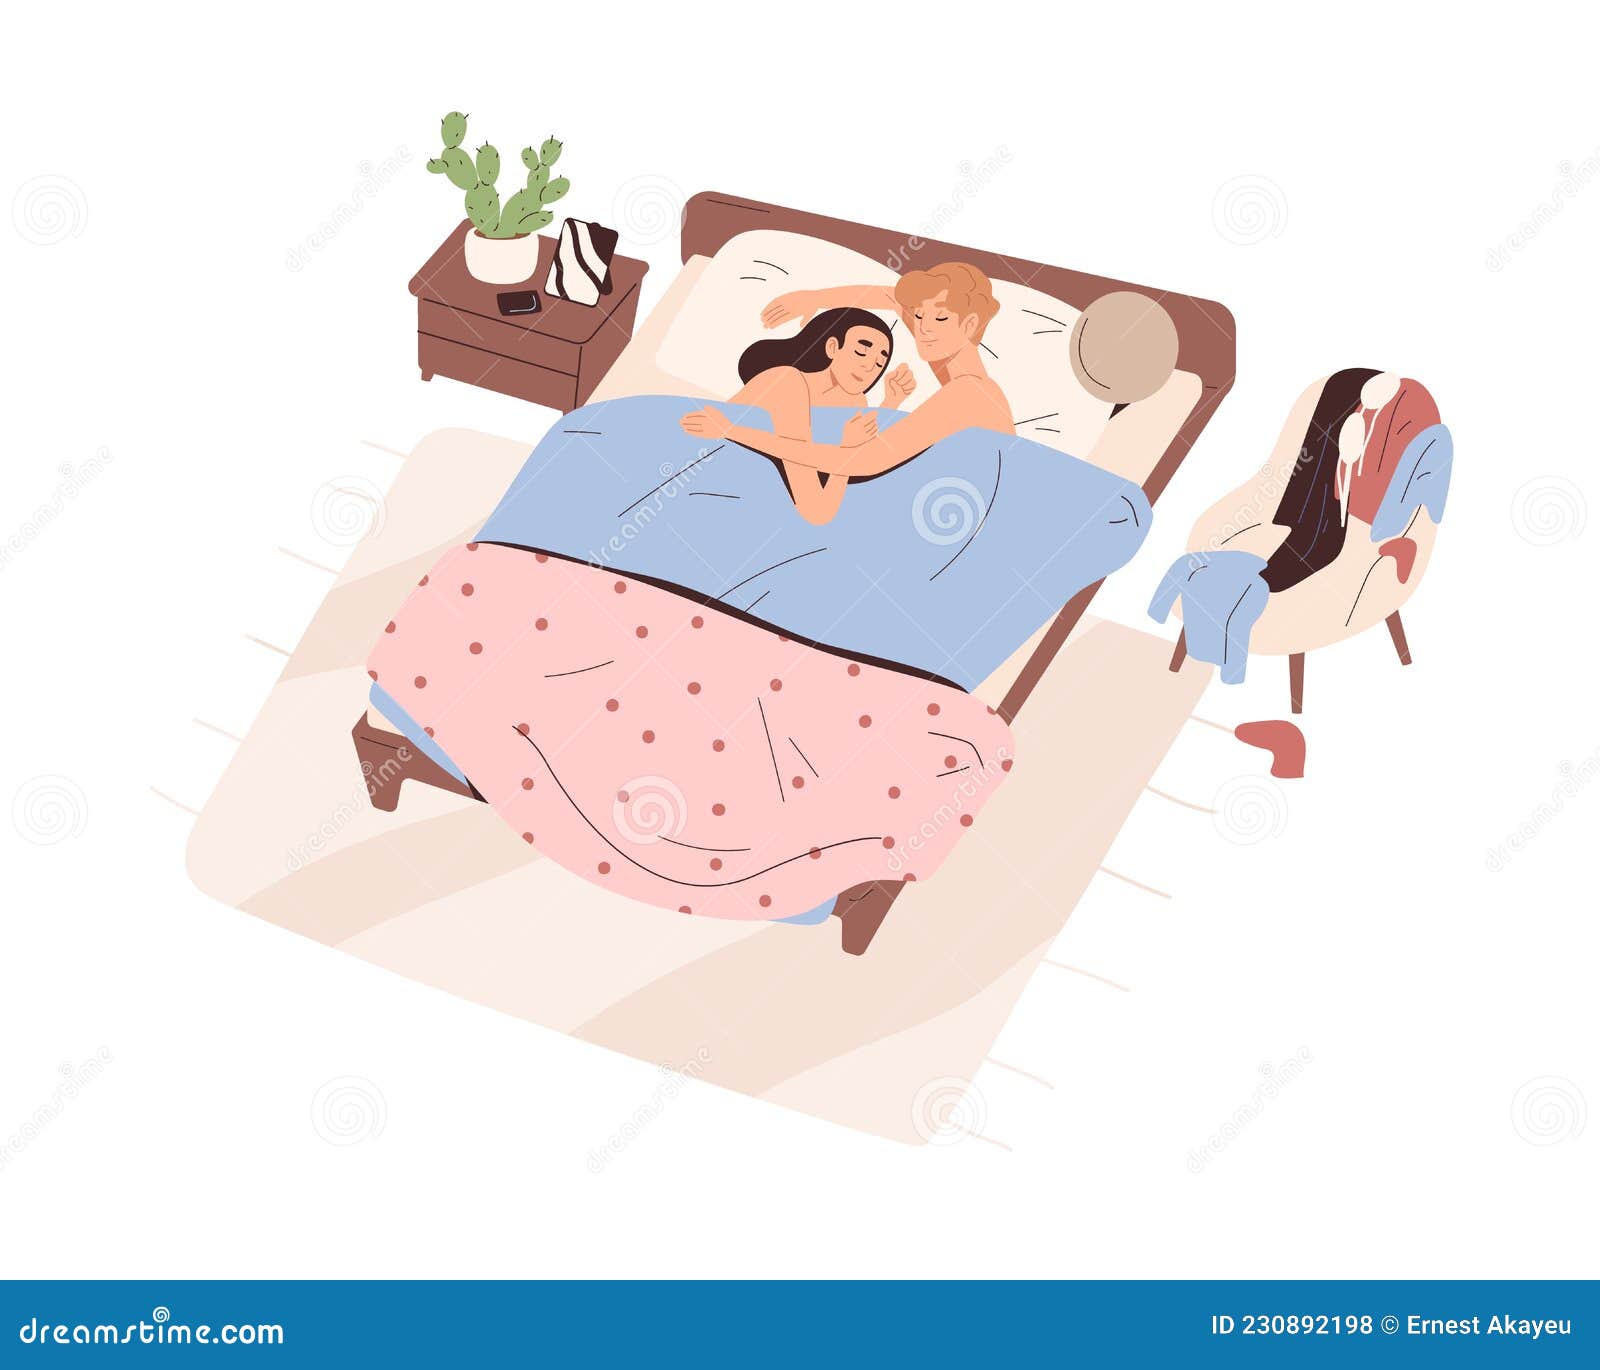 Love Romantic Couple Sleeping Under Blanket in Bed Together image